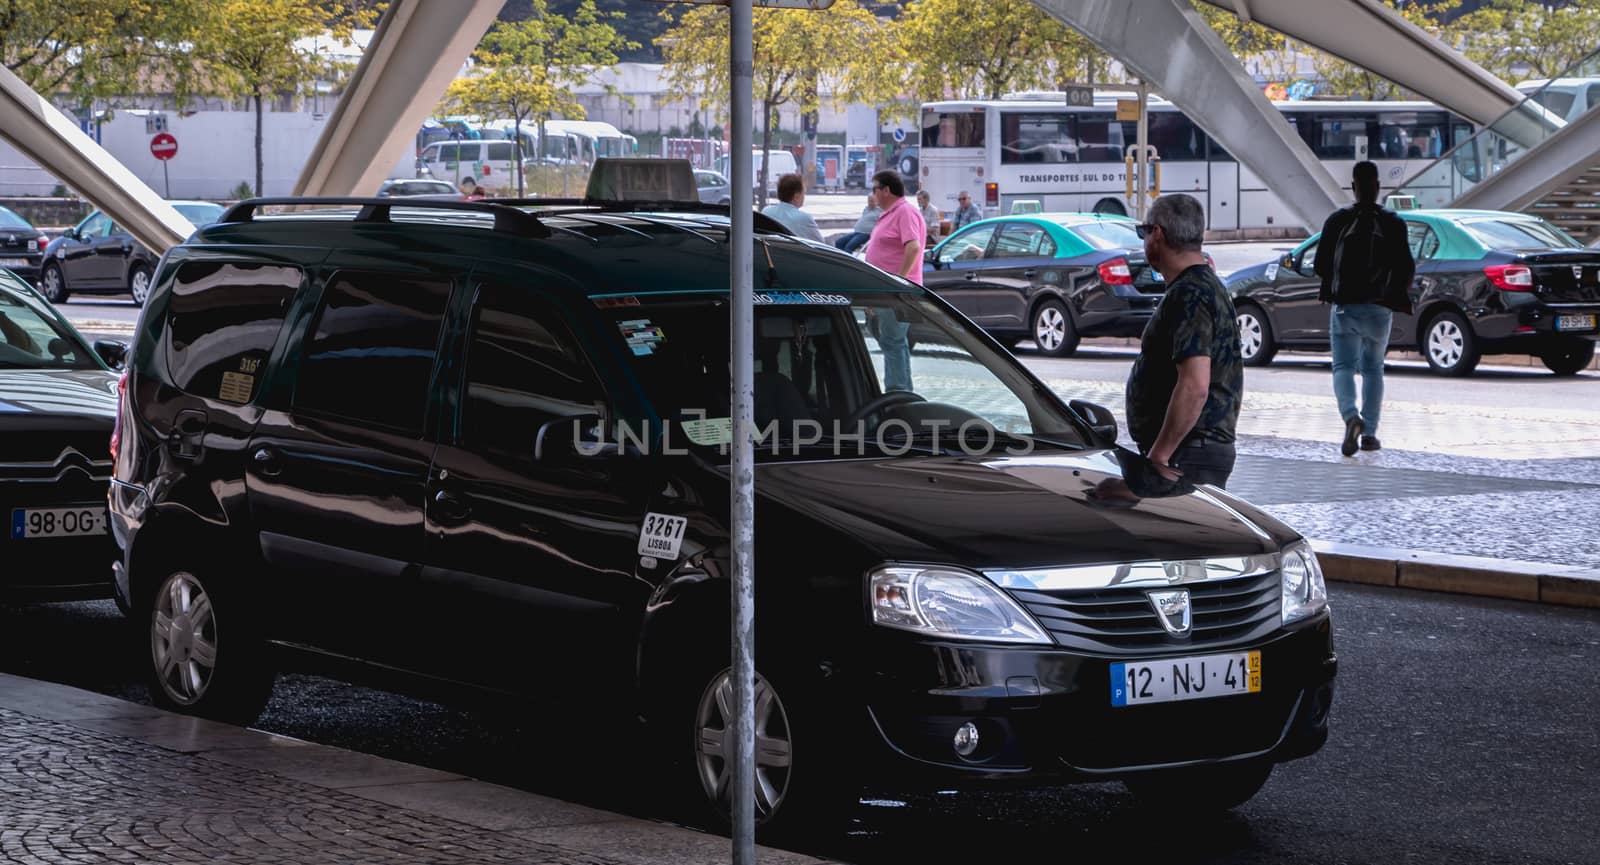 Lisbon, Portugal - May 7, 2018: Taxis cars parked in front of Oriente Intermodal Station Lisbon, a railway and road station completed in 1998 for Expo 98